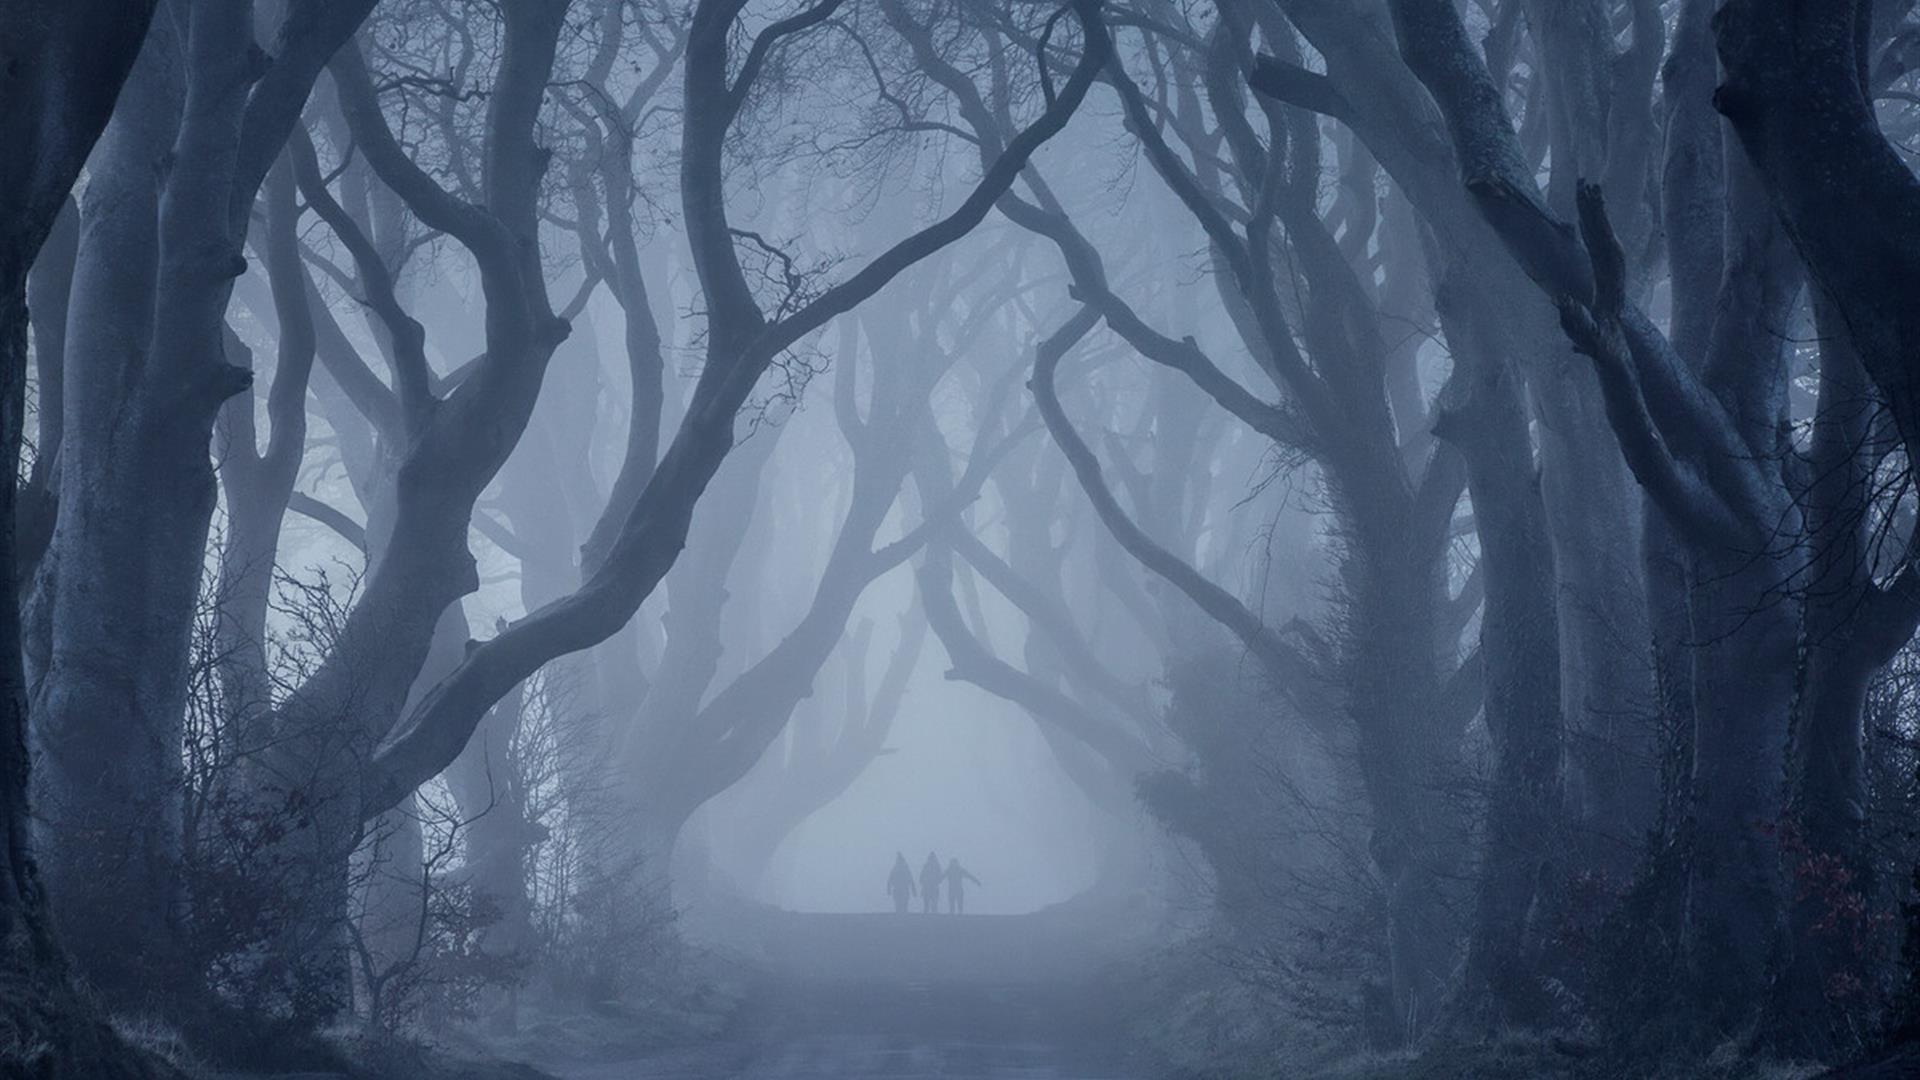 A group of three people can be seen through the mist walking between the dark hedges